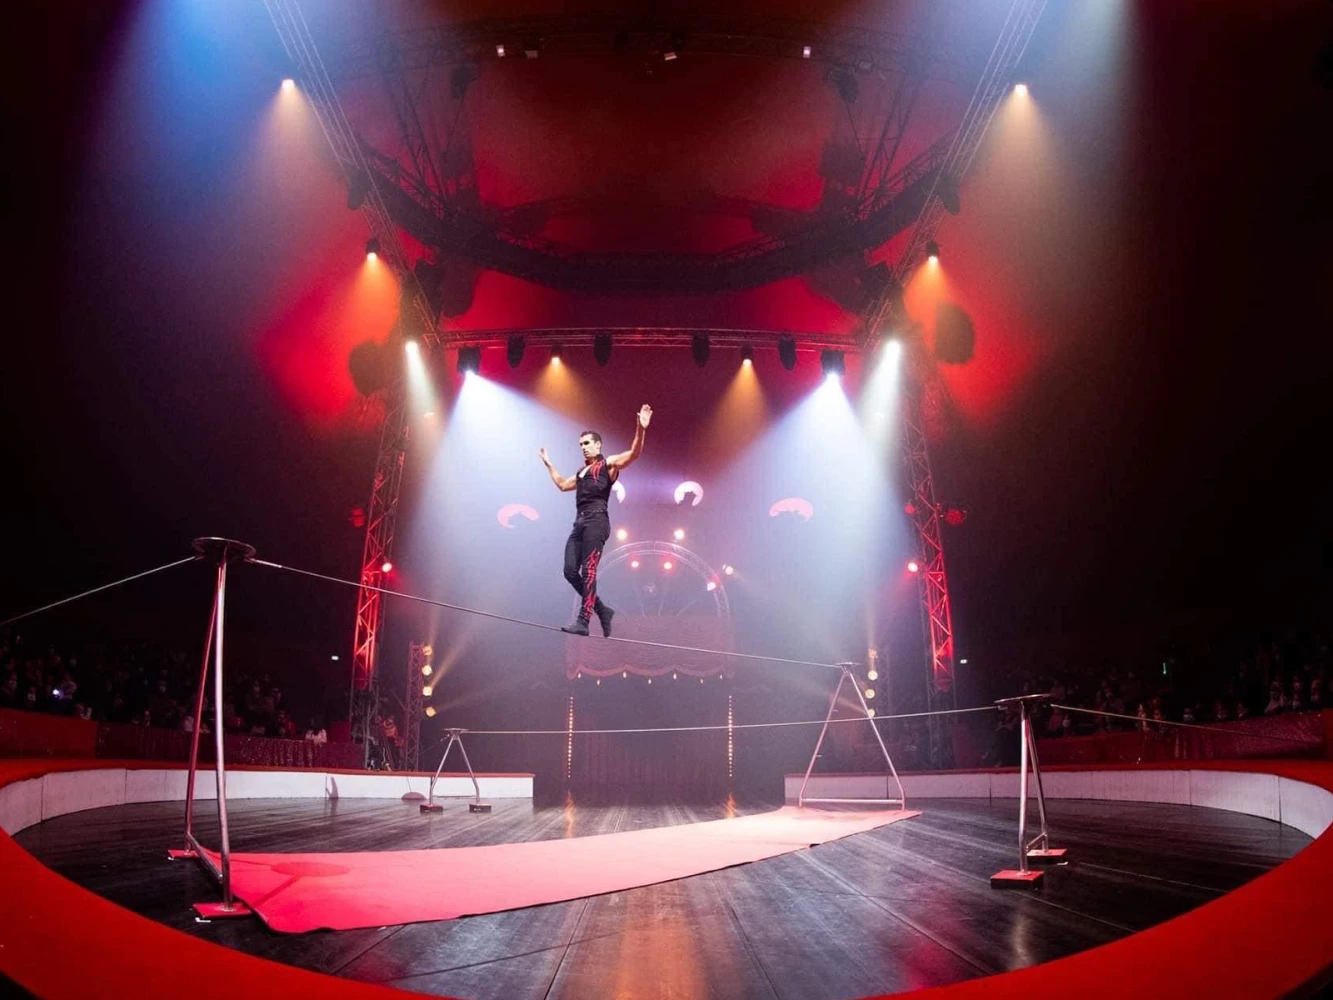 Big Apple Circus: What to expect - 5